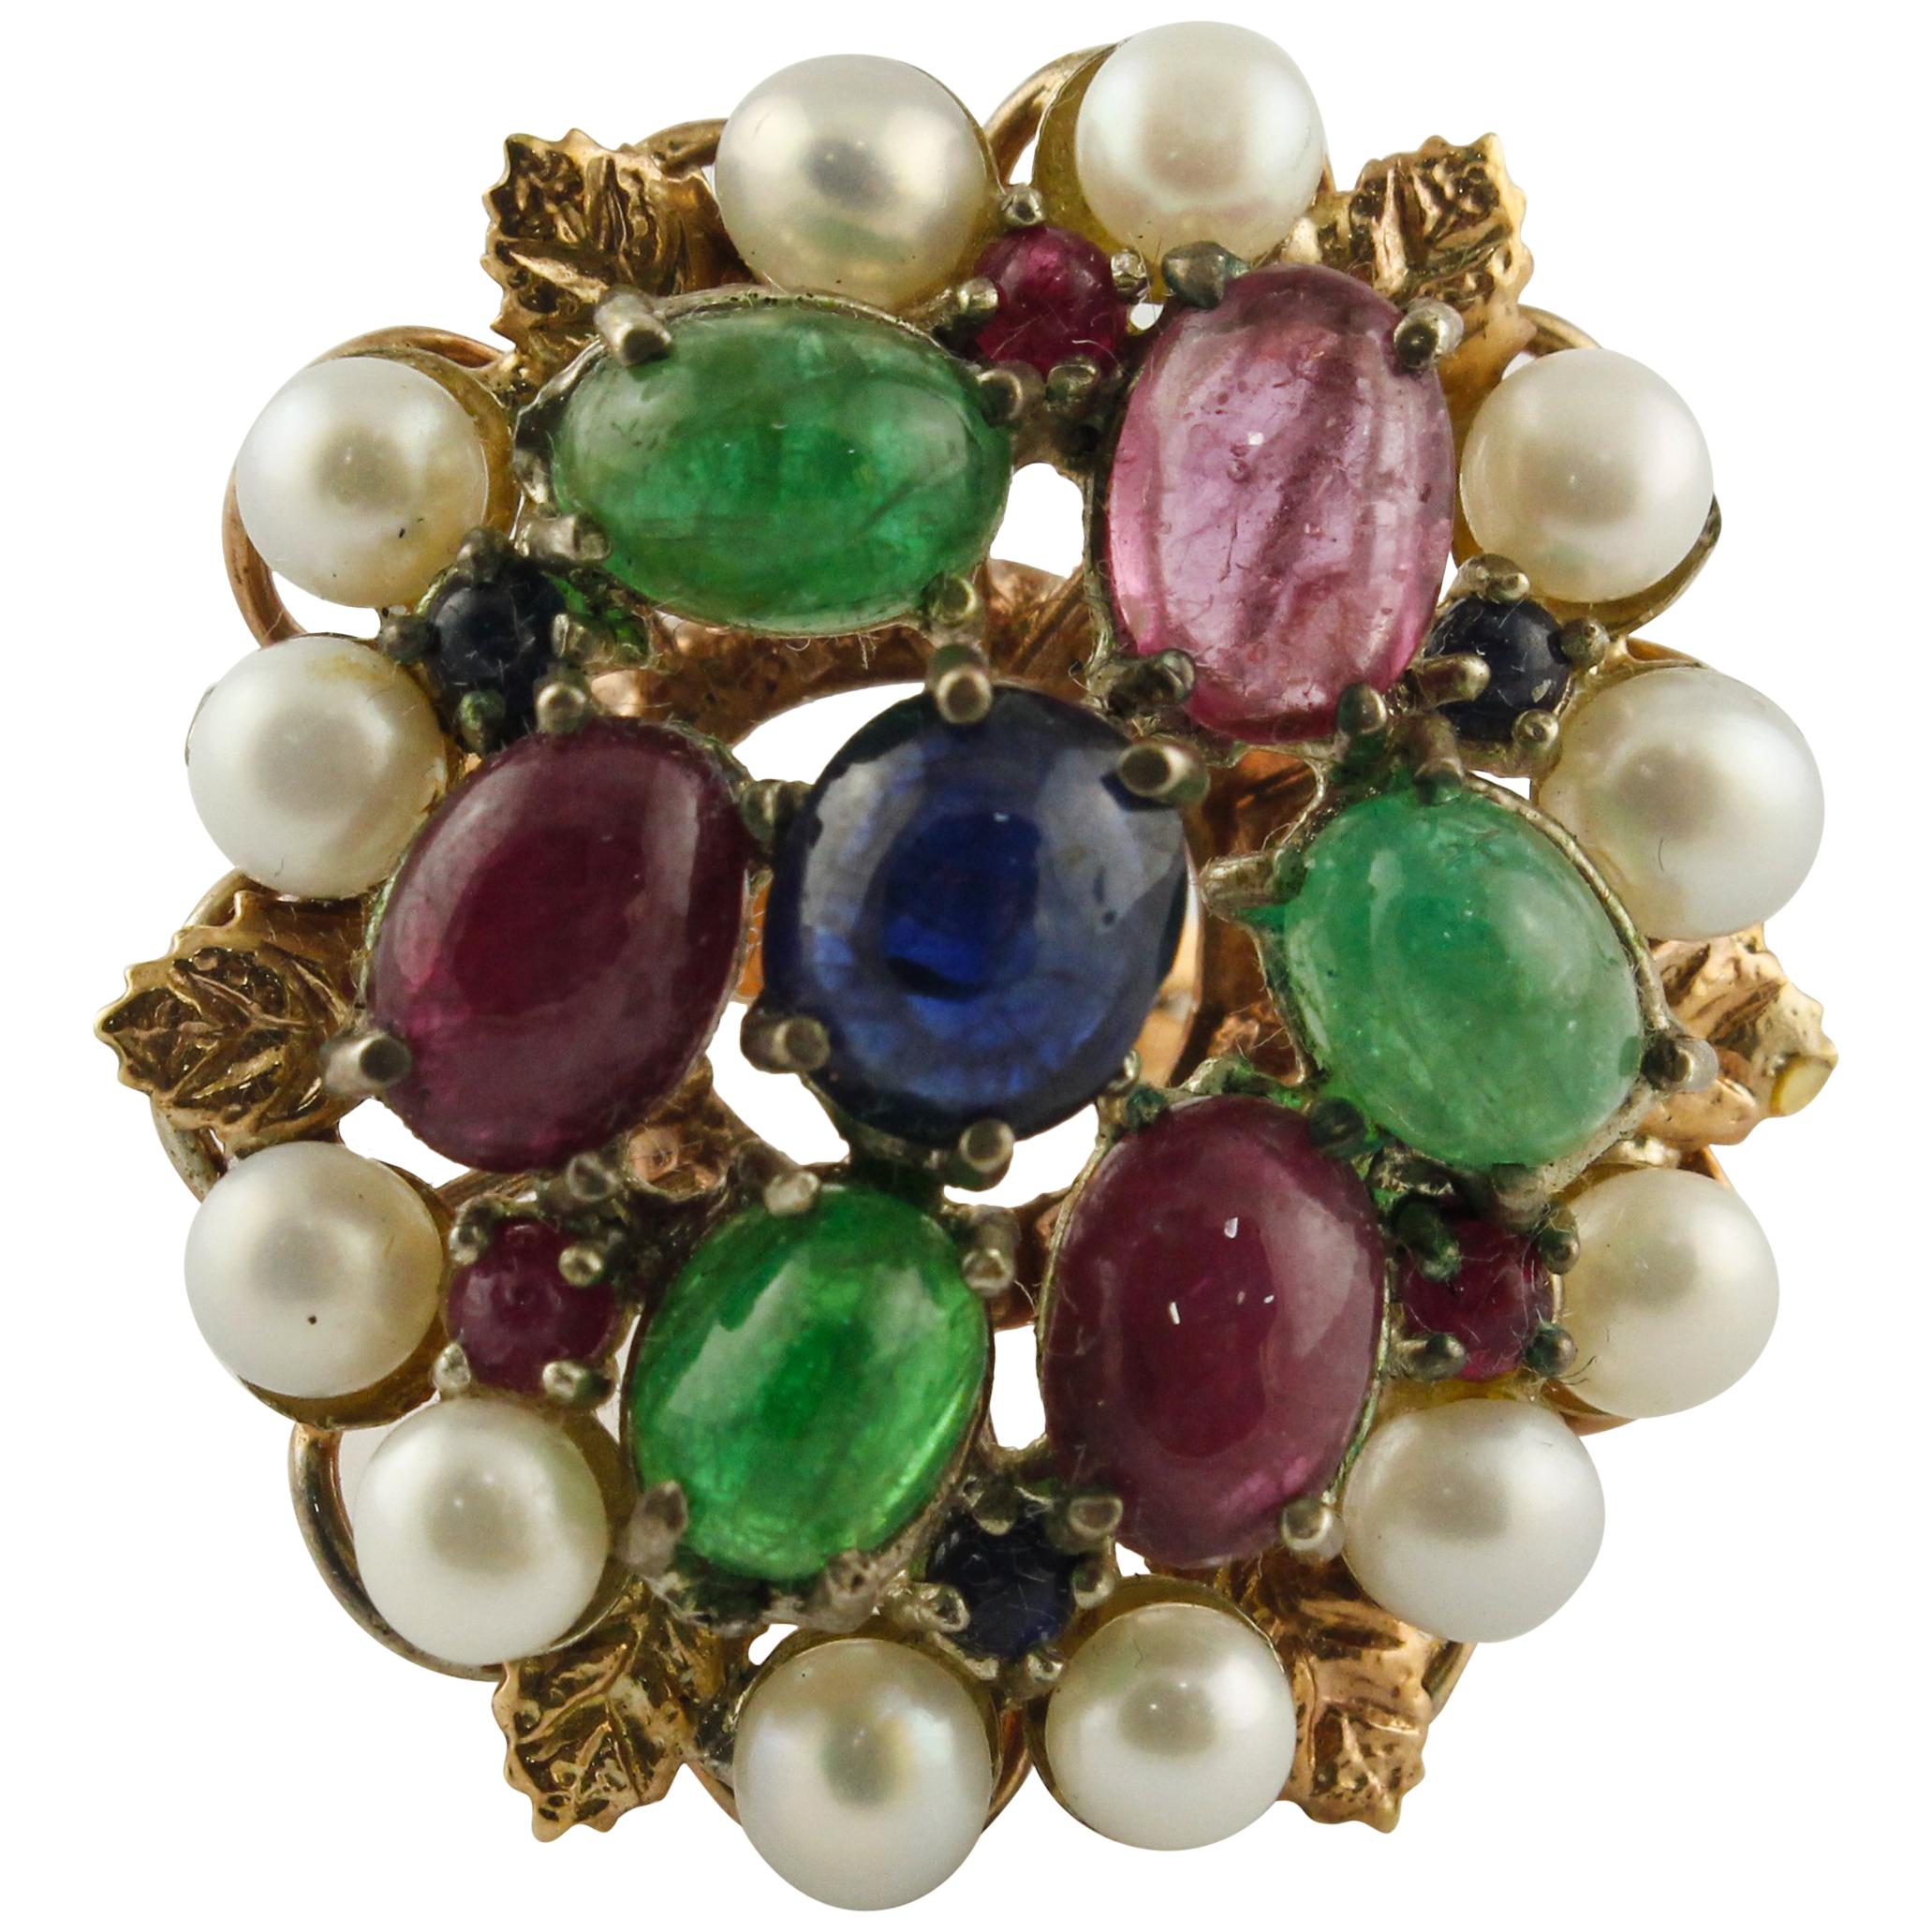 Blue Sapphires Rubies Emeralds Little Pearls Rose Gold and Silver Fashion Ring